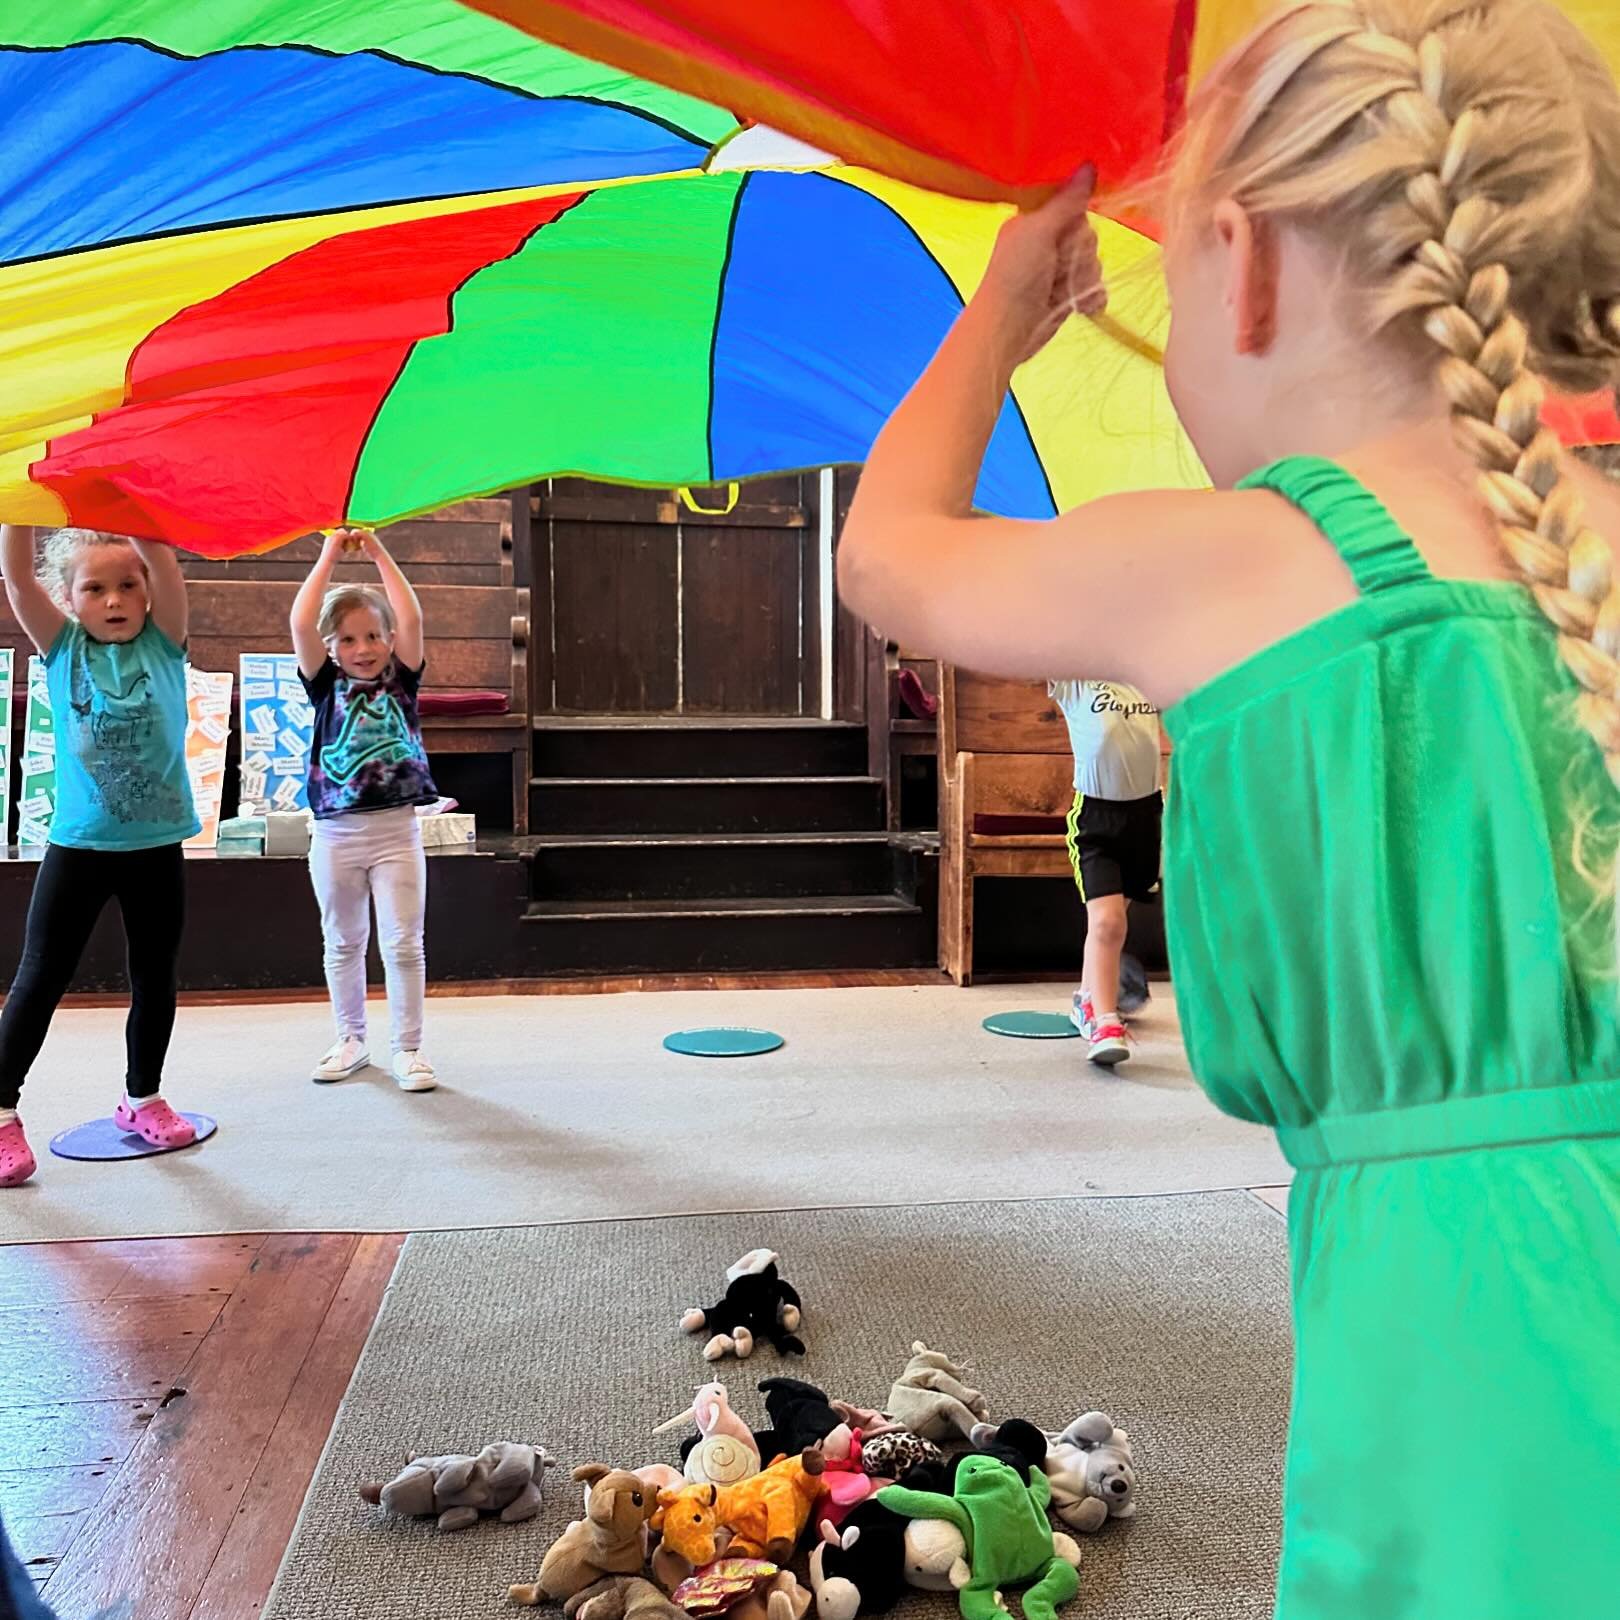 Lots of games happening in yoga for the end of the year! Parachute games are great for reviewing familiar poses in a way that&rsquo;s engaging and joyful for younger kids. They require focus &amp; patience while taking turns. Happy to share some of m